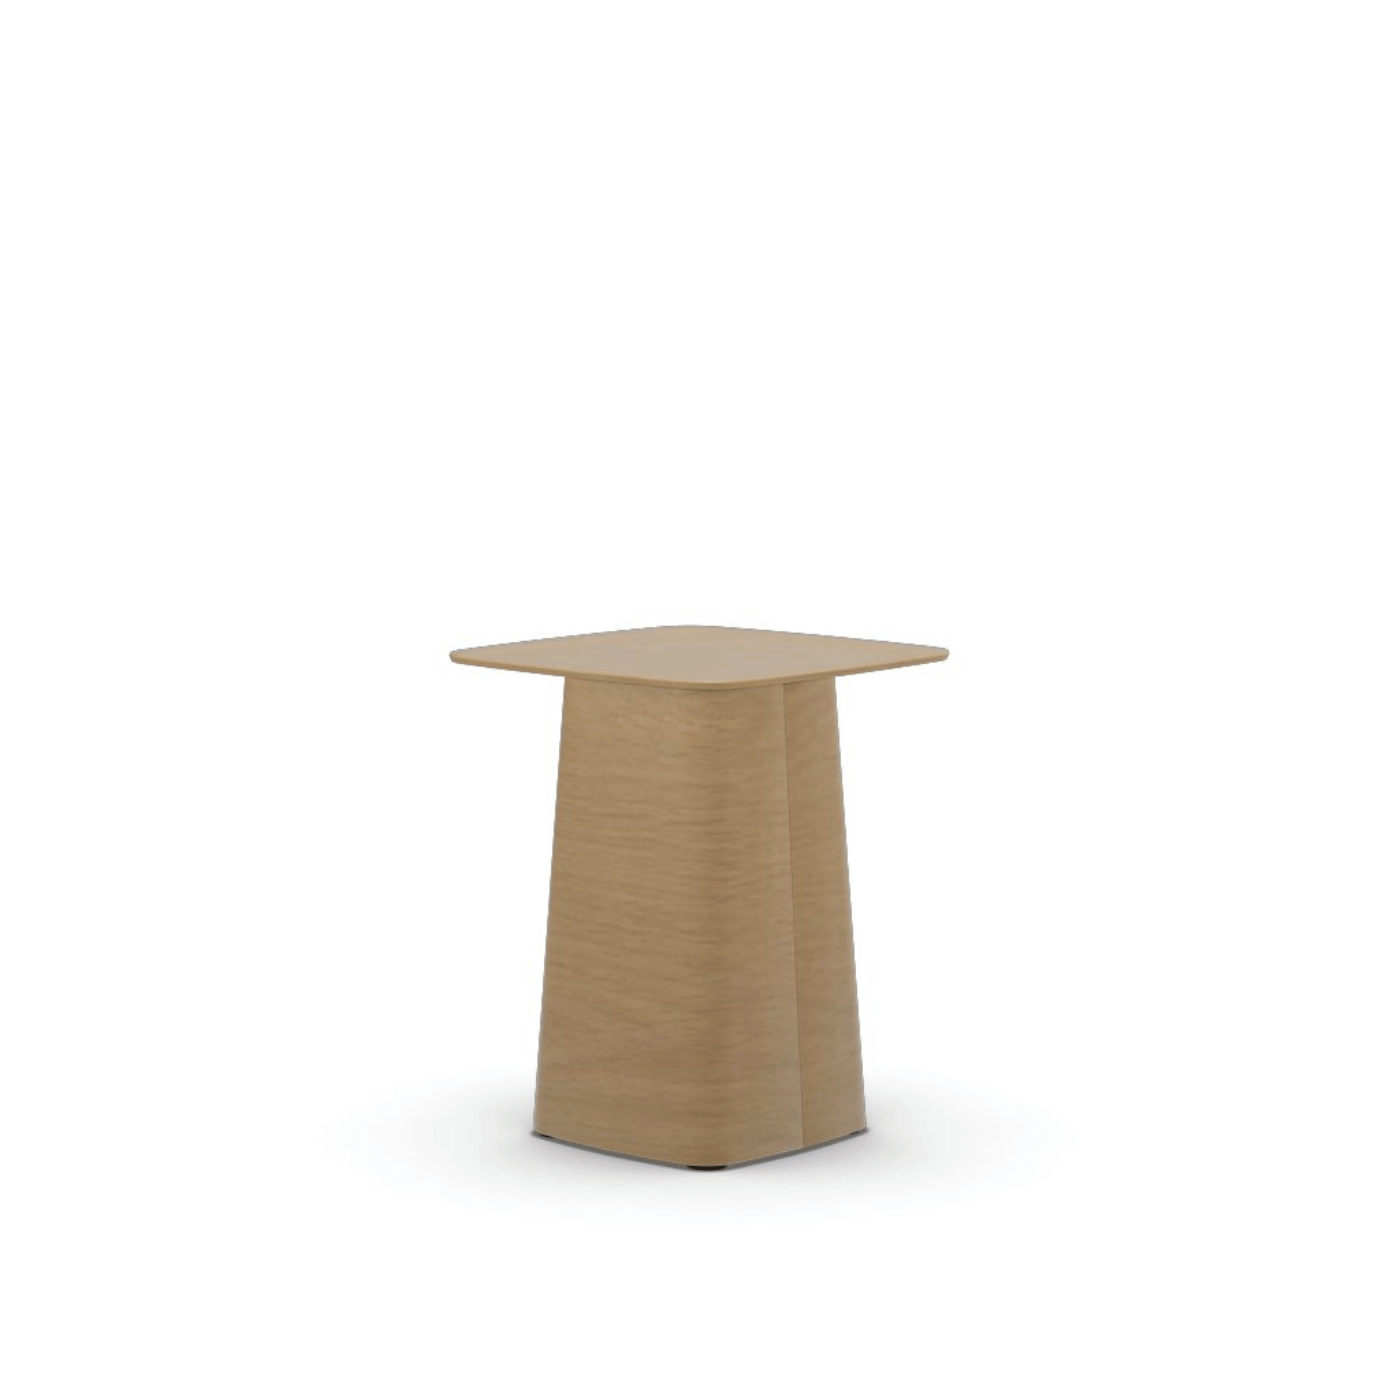 Vitra Wooden Side Table Small Light Oak Designer Furniture From Holloways Of Ludlow